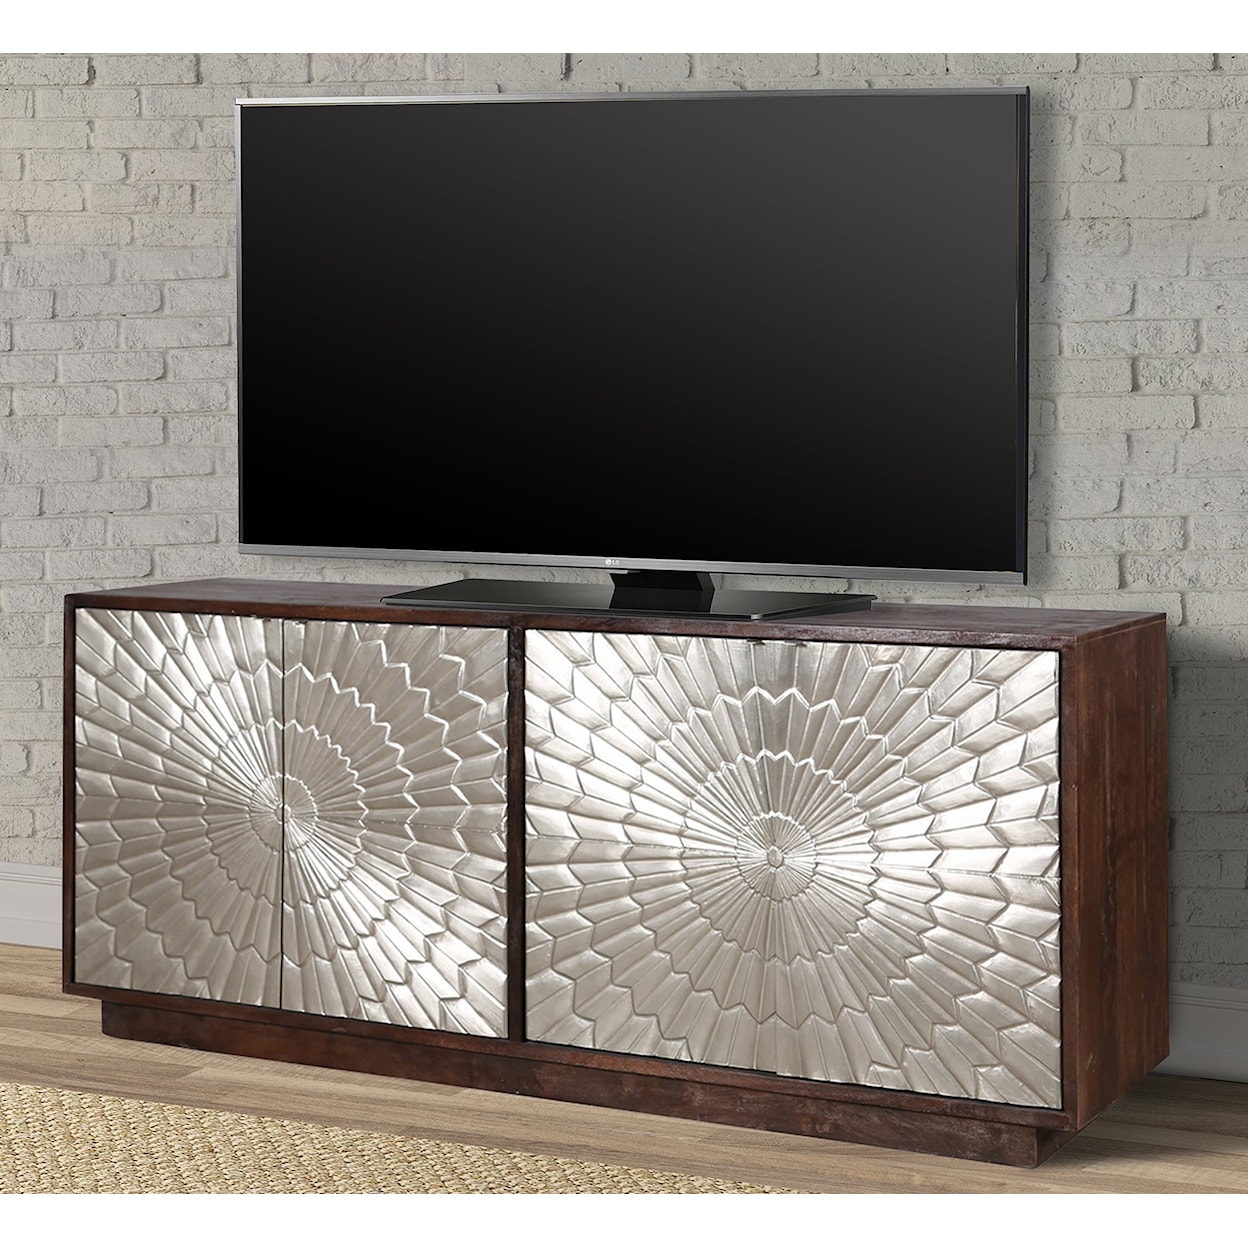 Paramount Furniture Crossings Palace TV Console